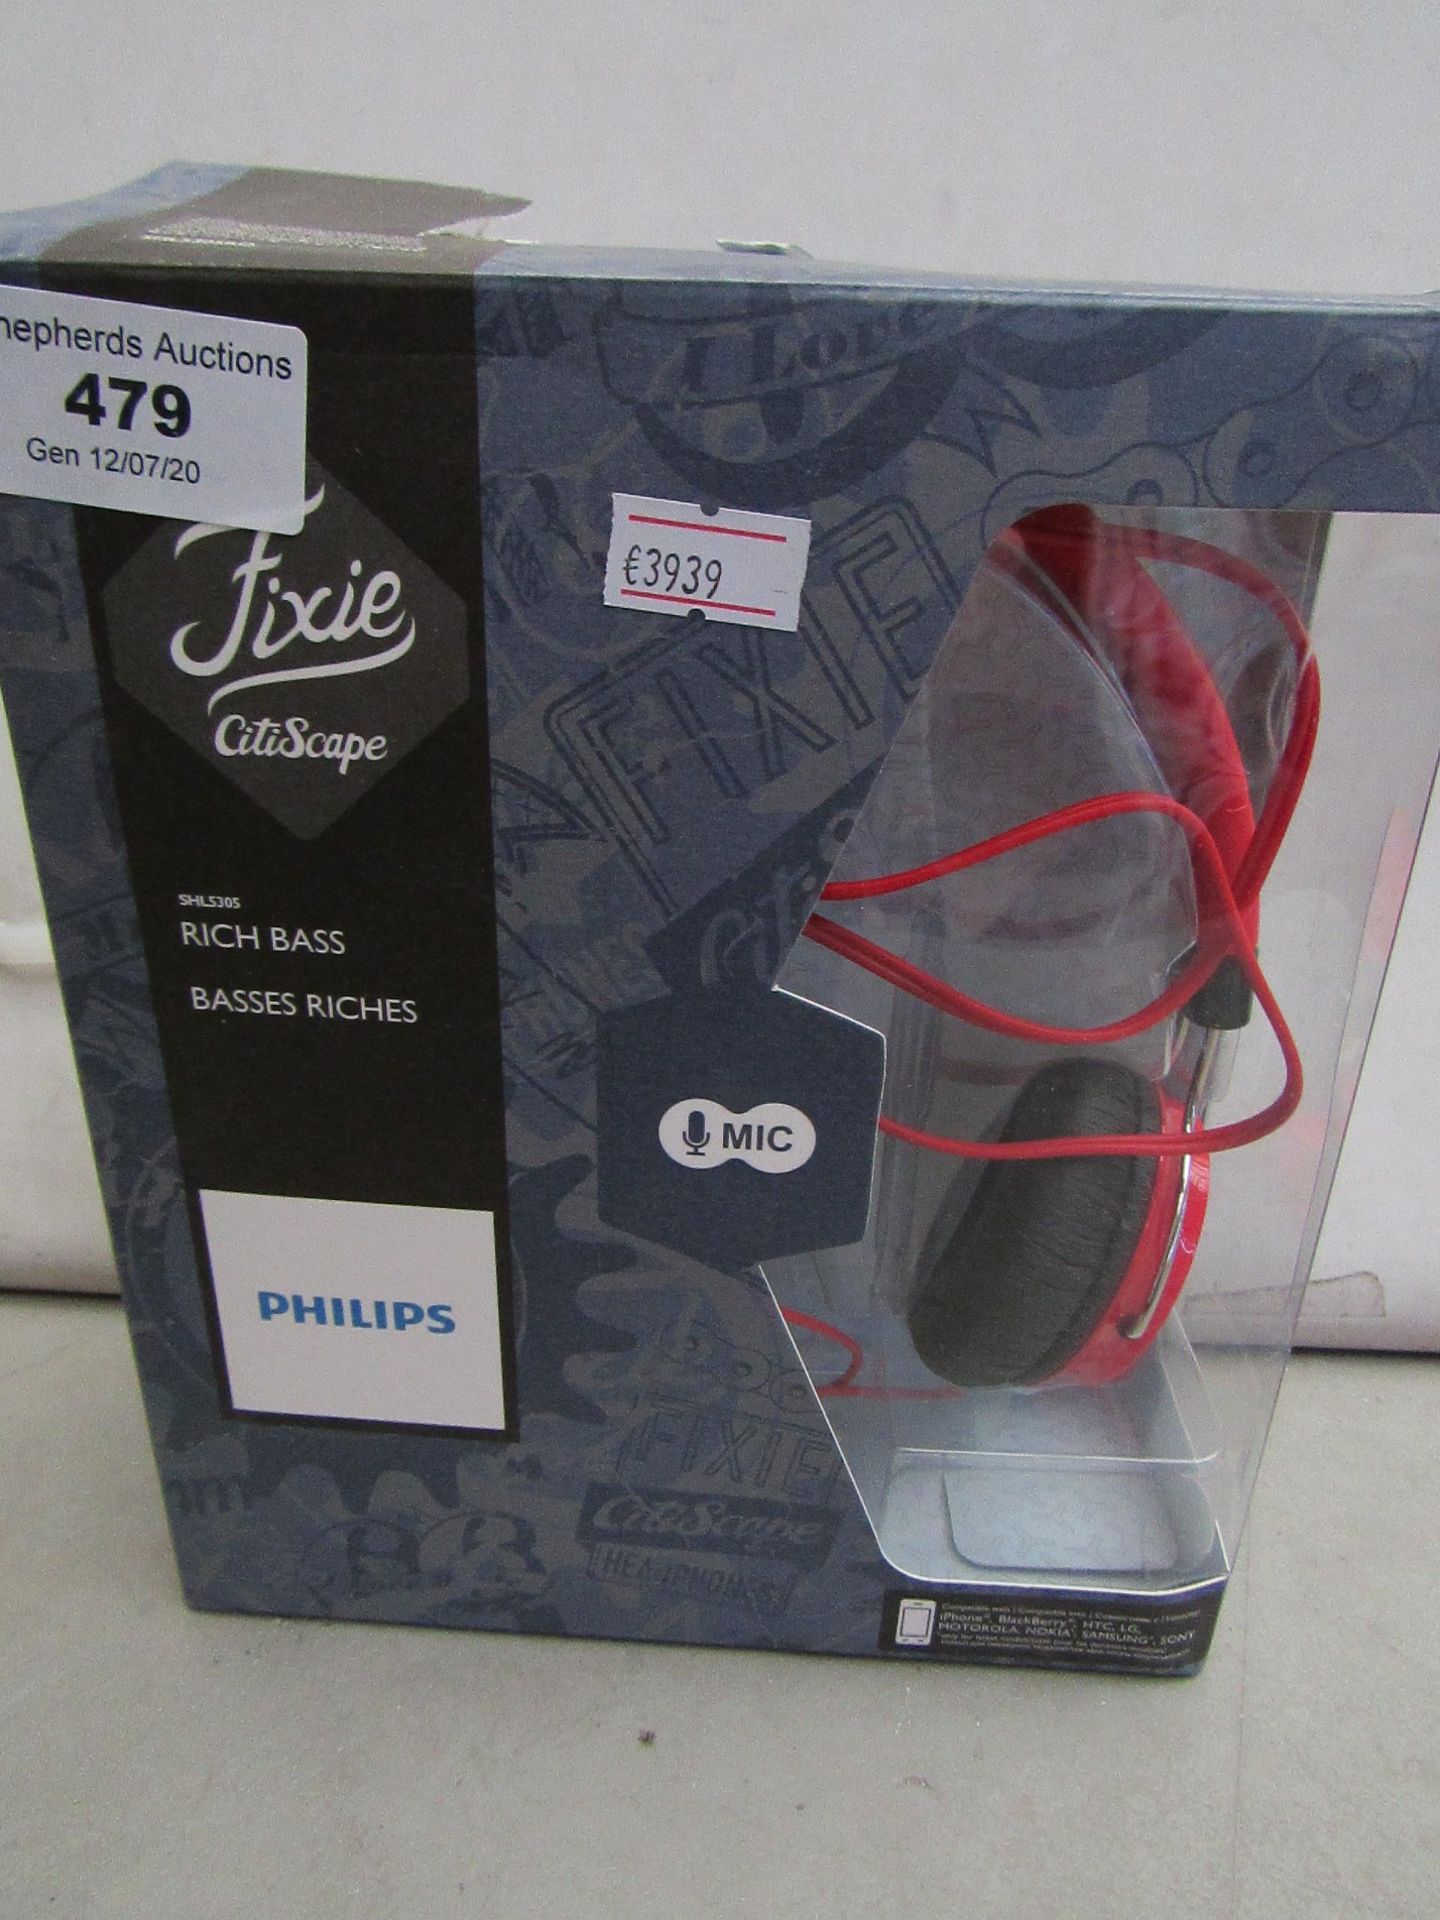 Philips Cityscape bass headphones, new and boxed.